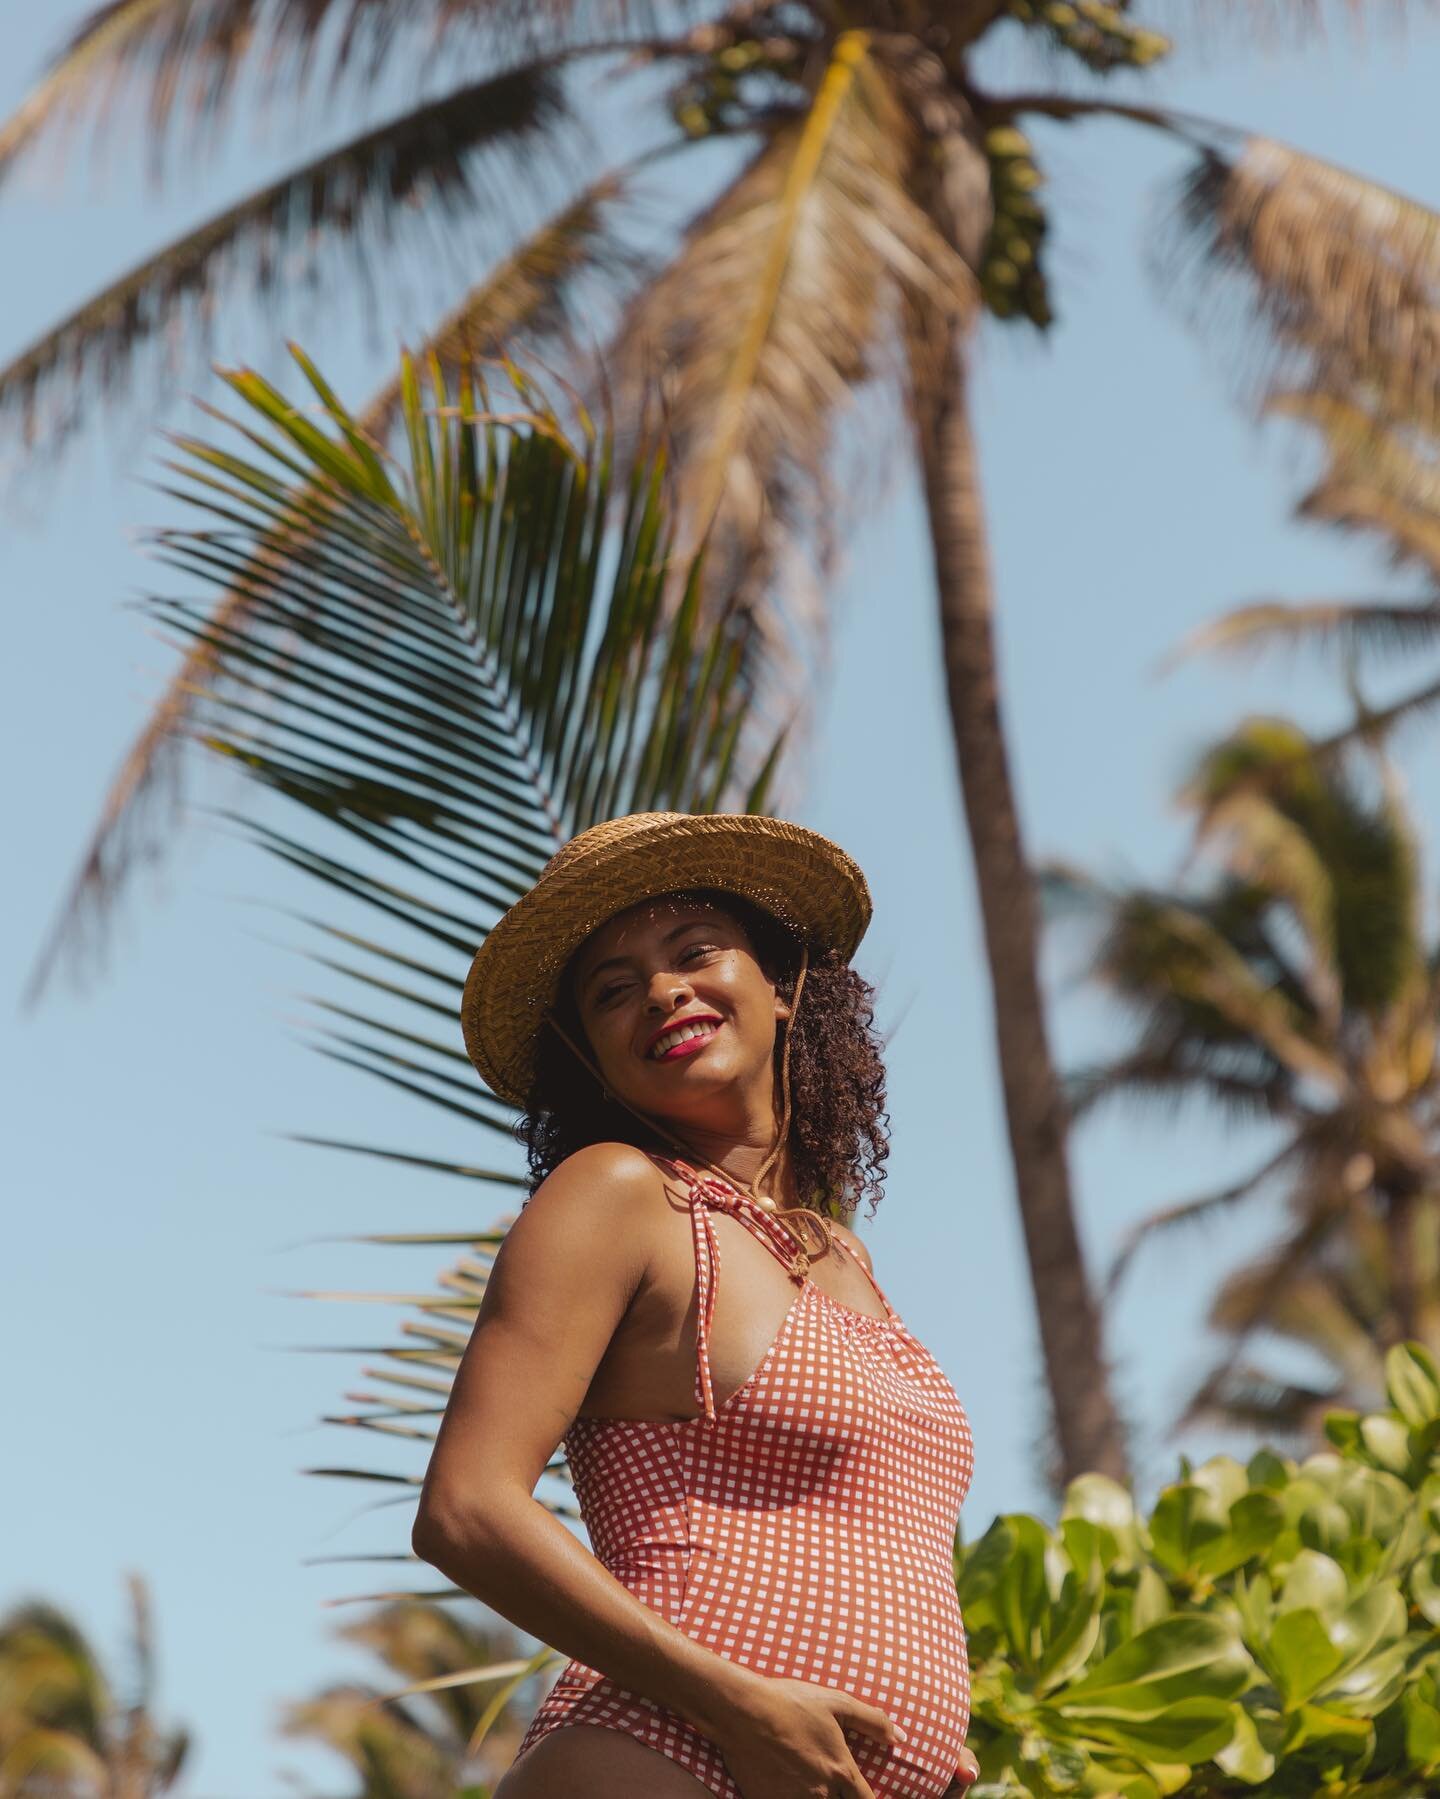 Gems from a very tropical maternity moment with @jawaiiangirl808 are about to make their debut 🌴👀🙌🏼

retreat: @levelthefuckuppodcast 
styling: @miagphotography 
model: @jawaiiangirl808 
bralette: @victoriassecret